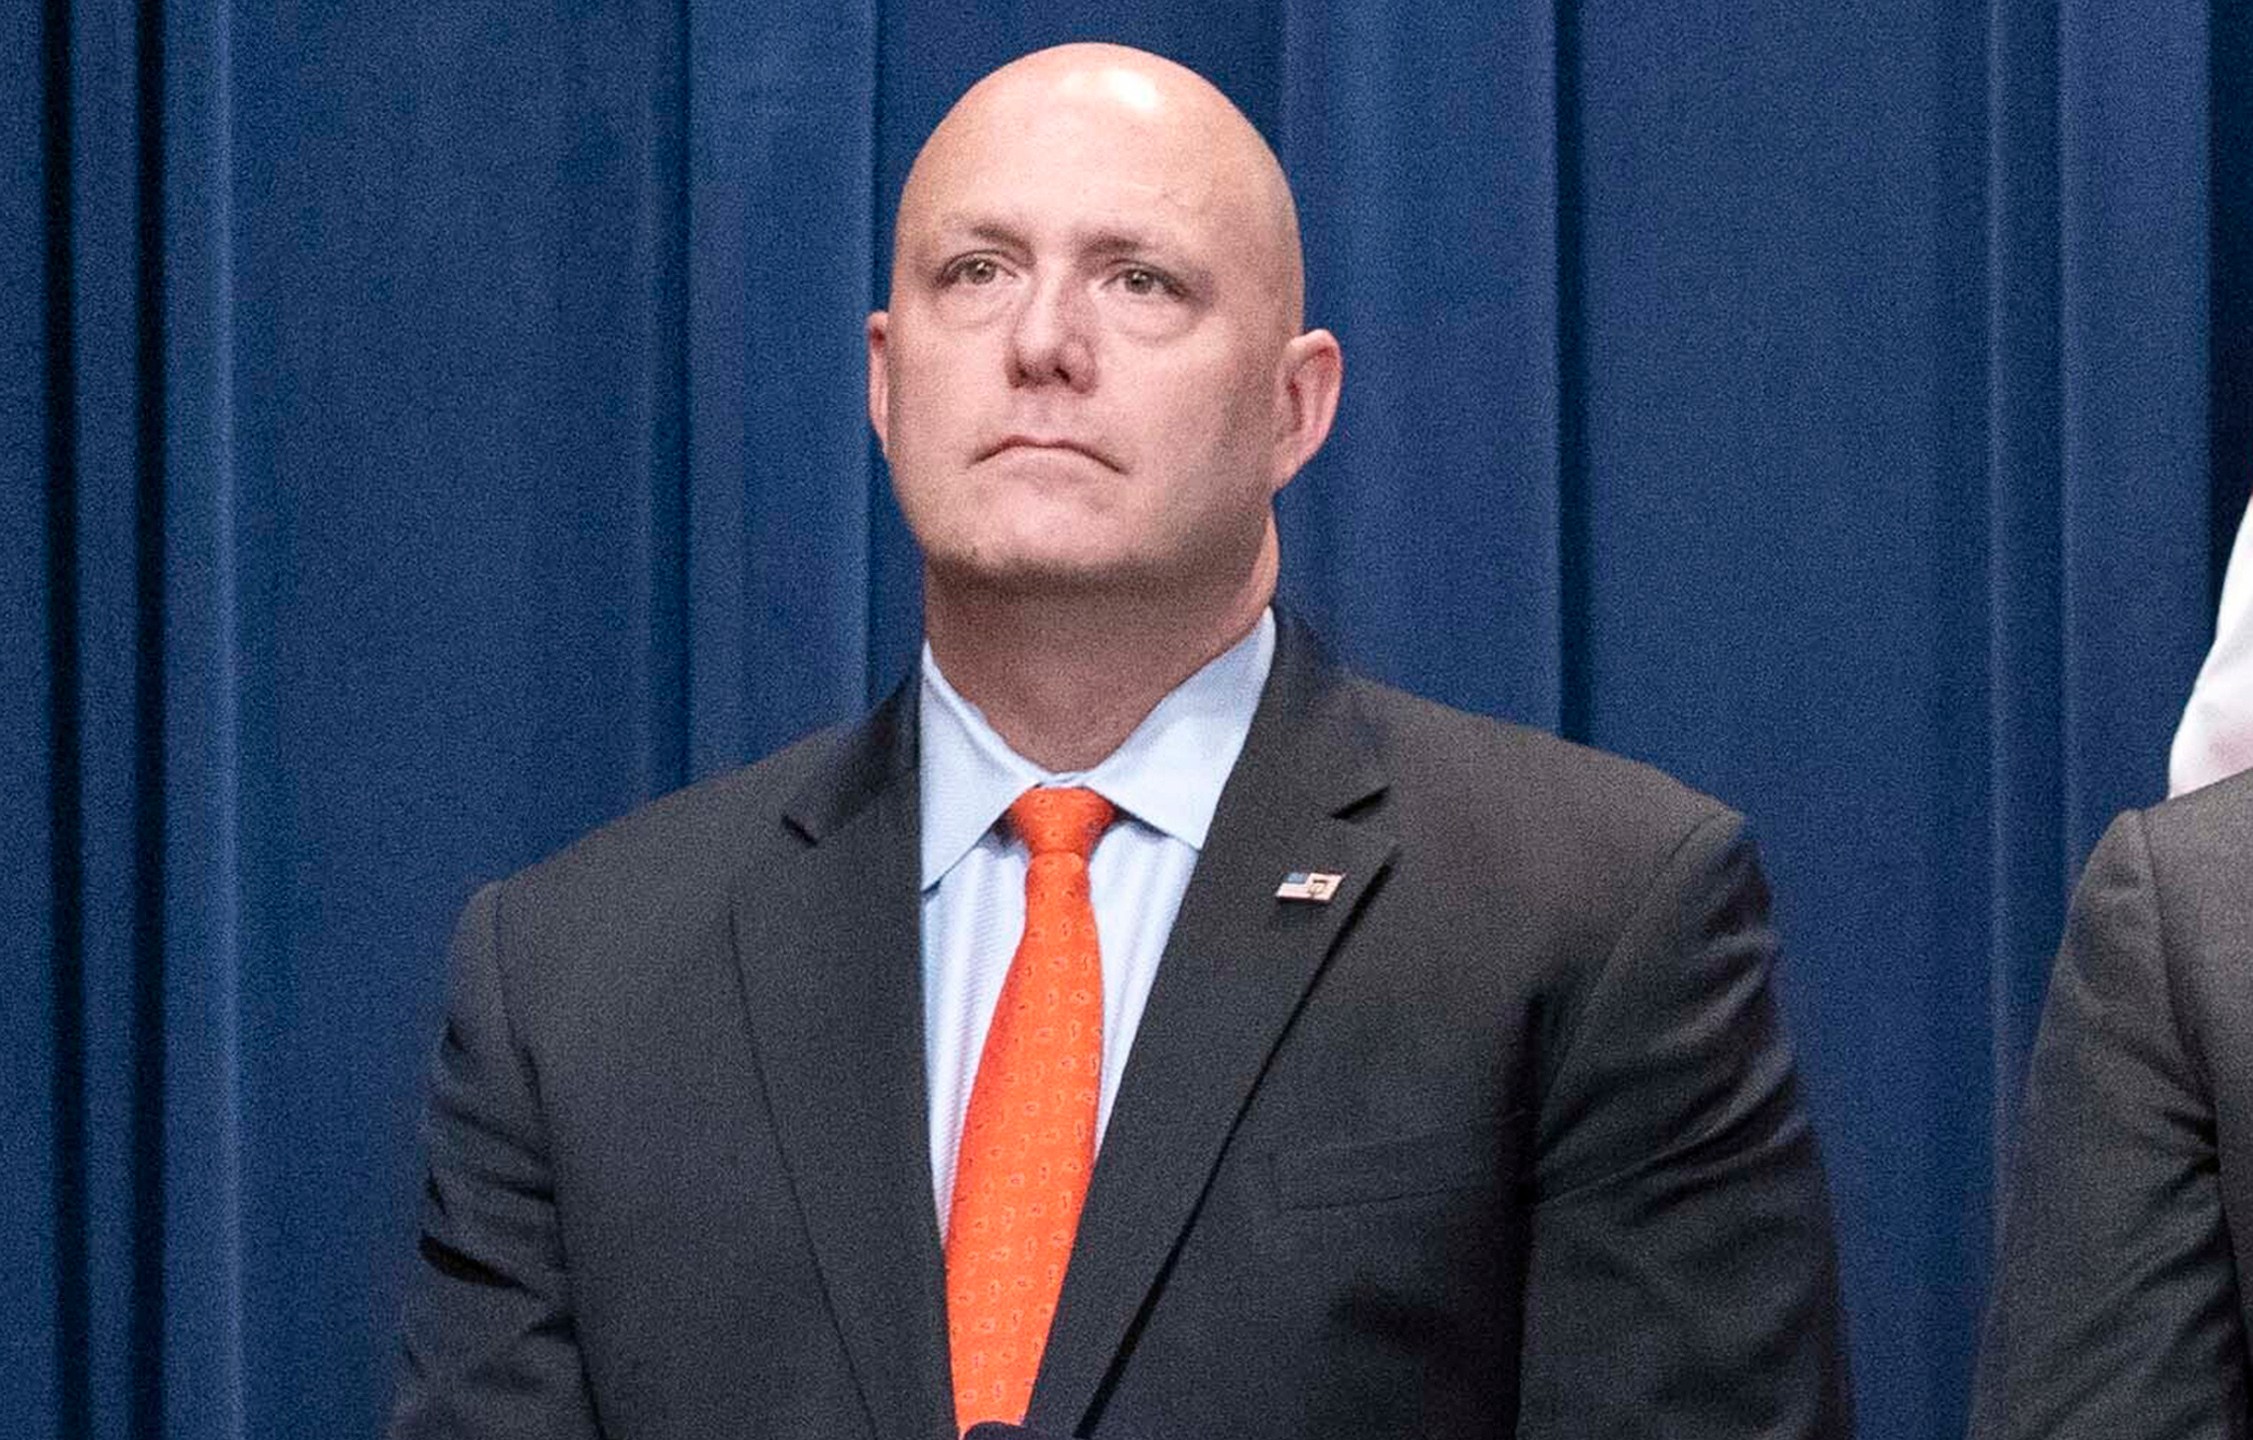 Immigration and Customs Enforcement Acting Deputy Director Patrick Lechleitner at a news conference on Sept. 13, 2022.